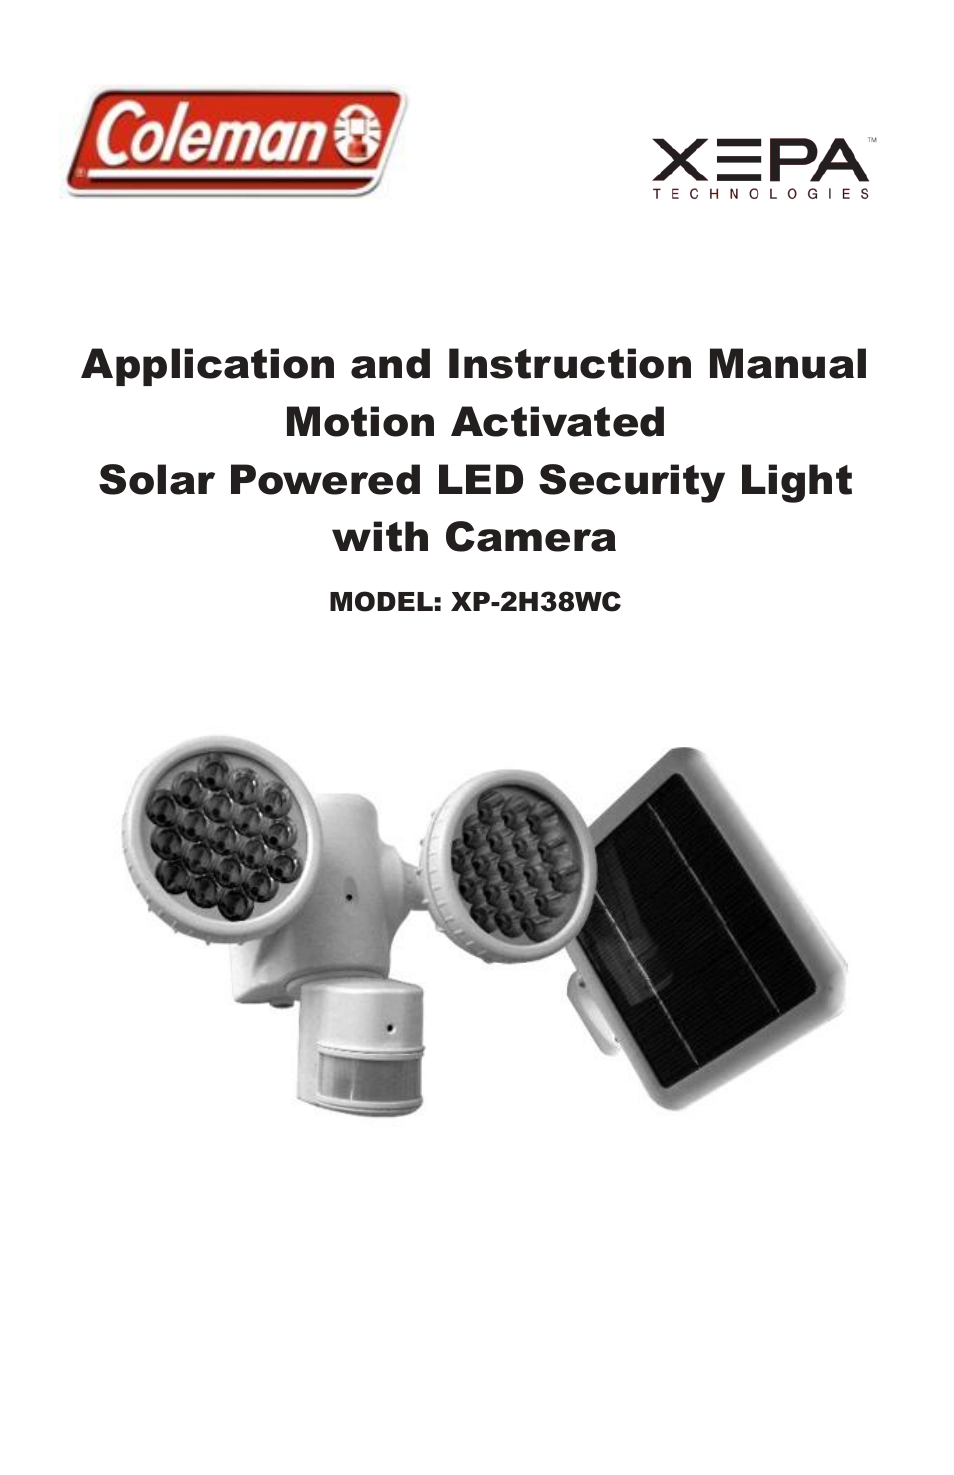 Motion Activated Solar Powered LED Security Camera Light with Camera XP-2H38WC